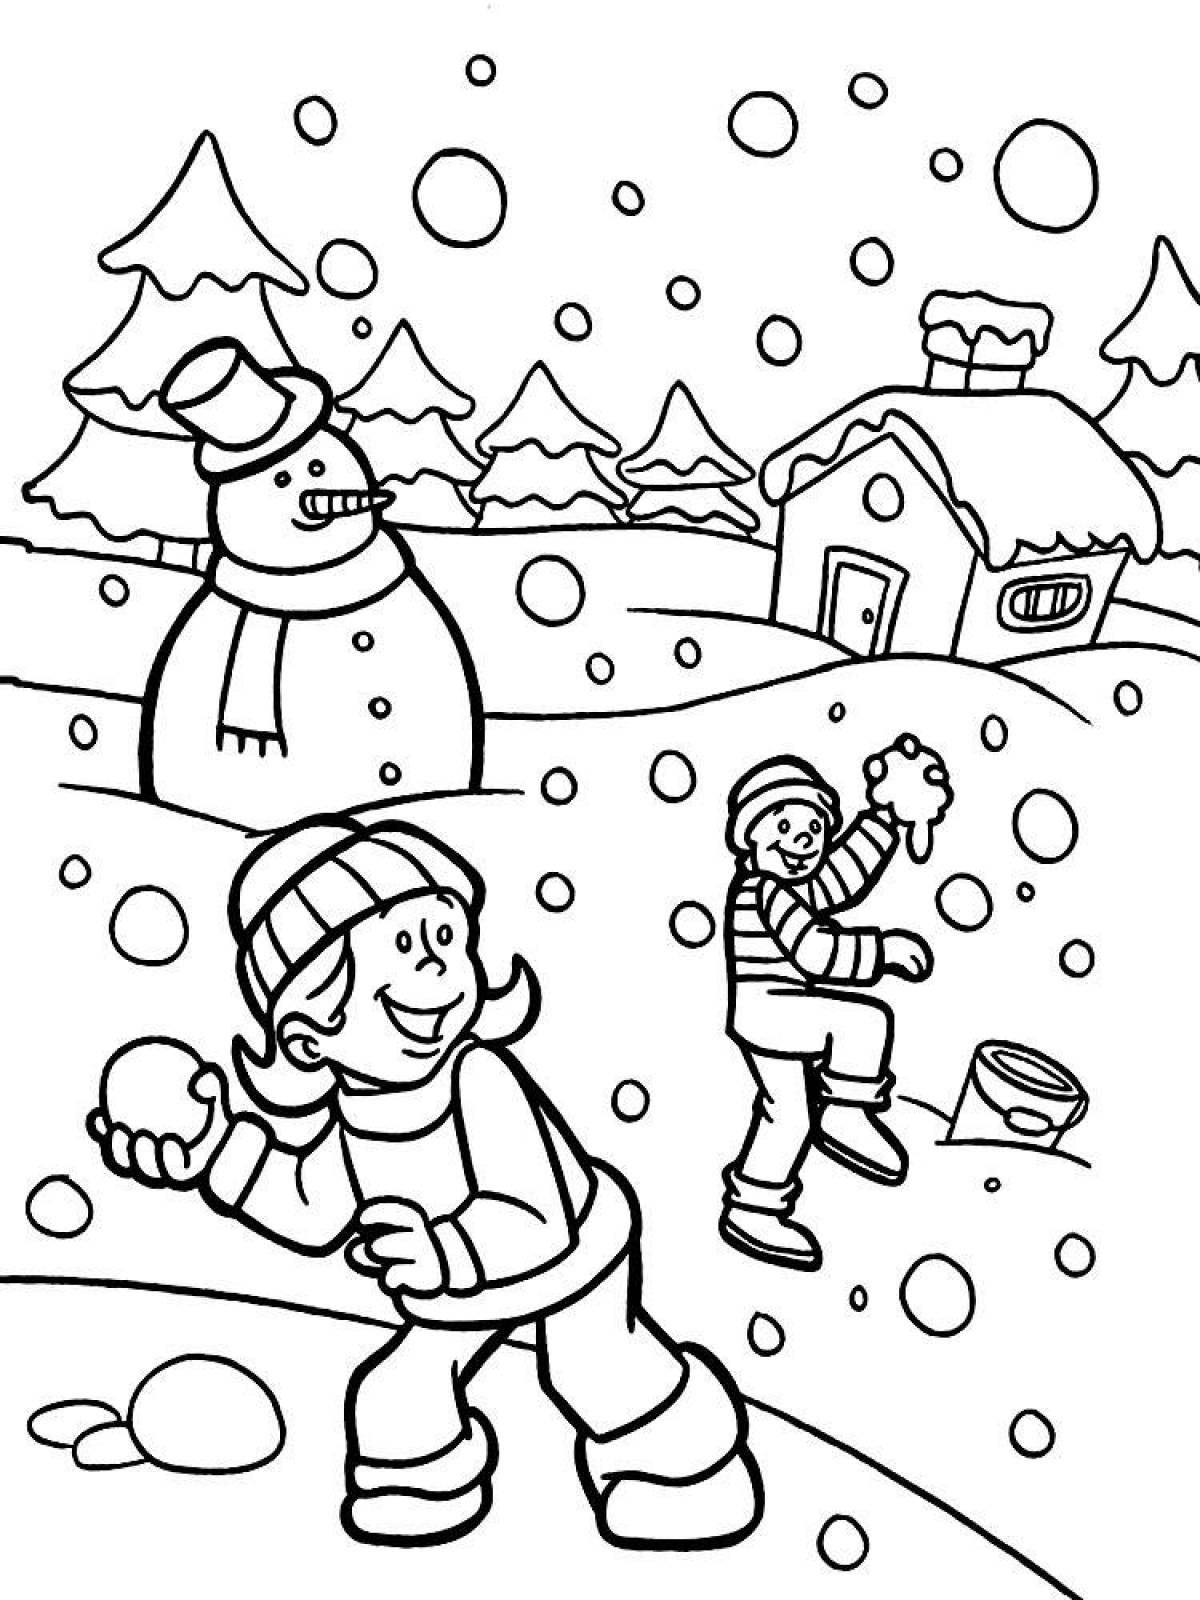 Wonderful winter coloring book for 4-5 year olds